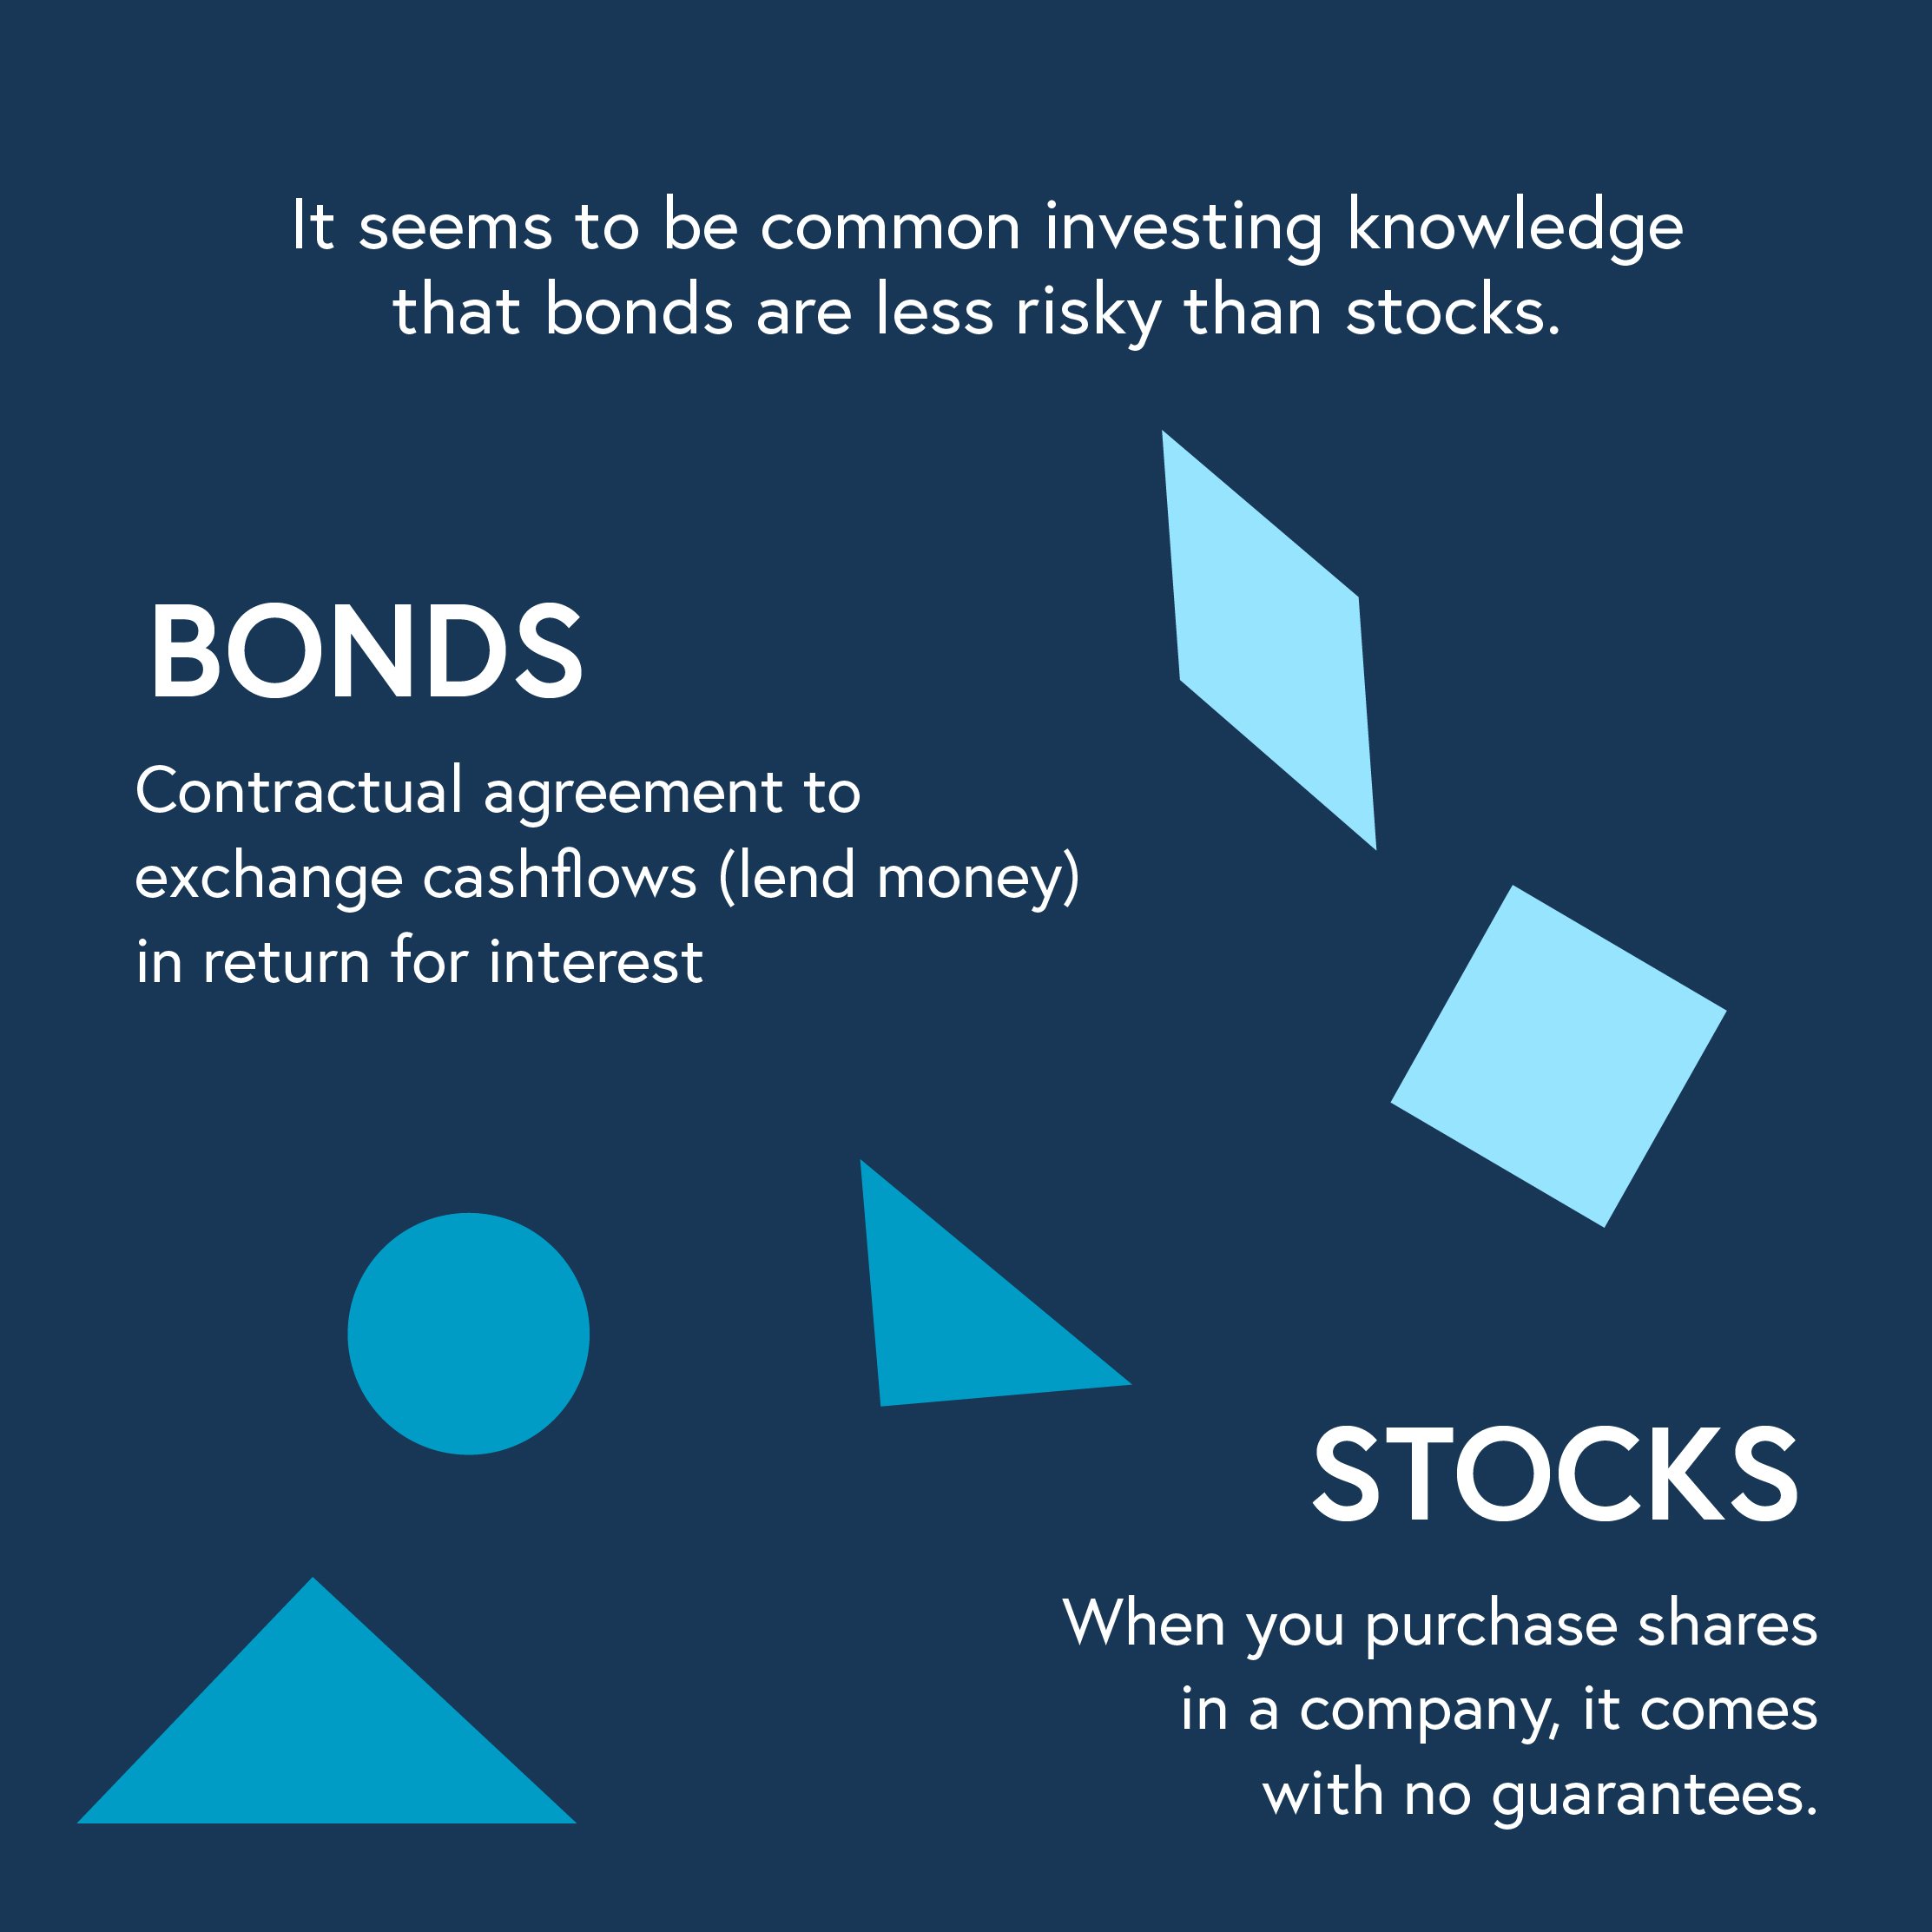 240220_Did you know that stocks can be less risky than bonds?-02.jpg